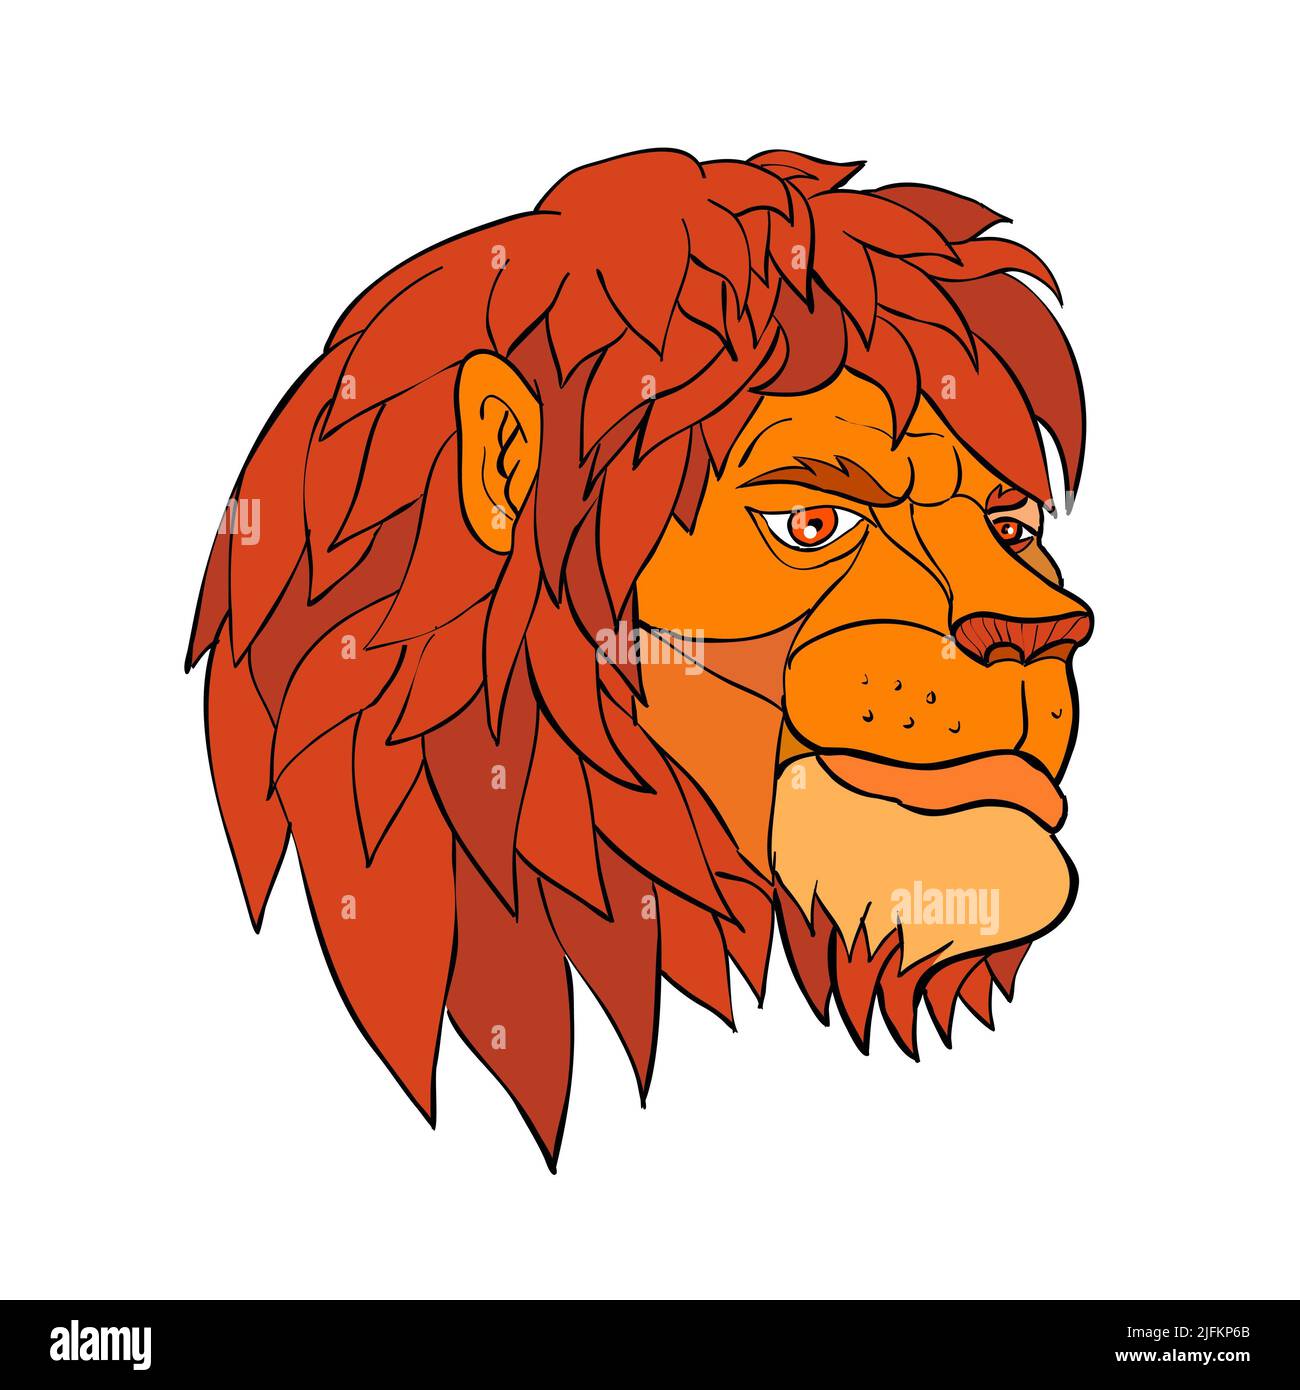 Cartoon style illustration of a head of a lion with full mane ruminating in pensive mood viewed from side on isolated background in color. Stock Photo